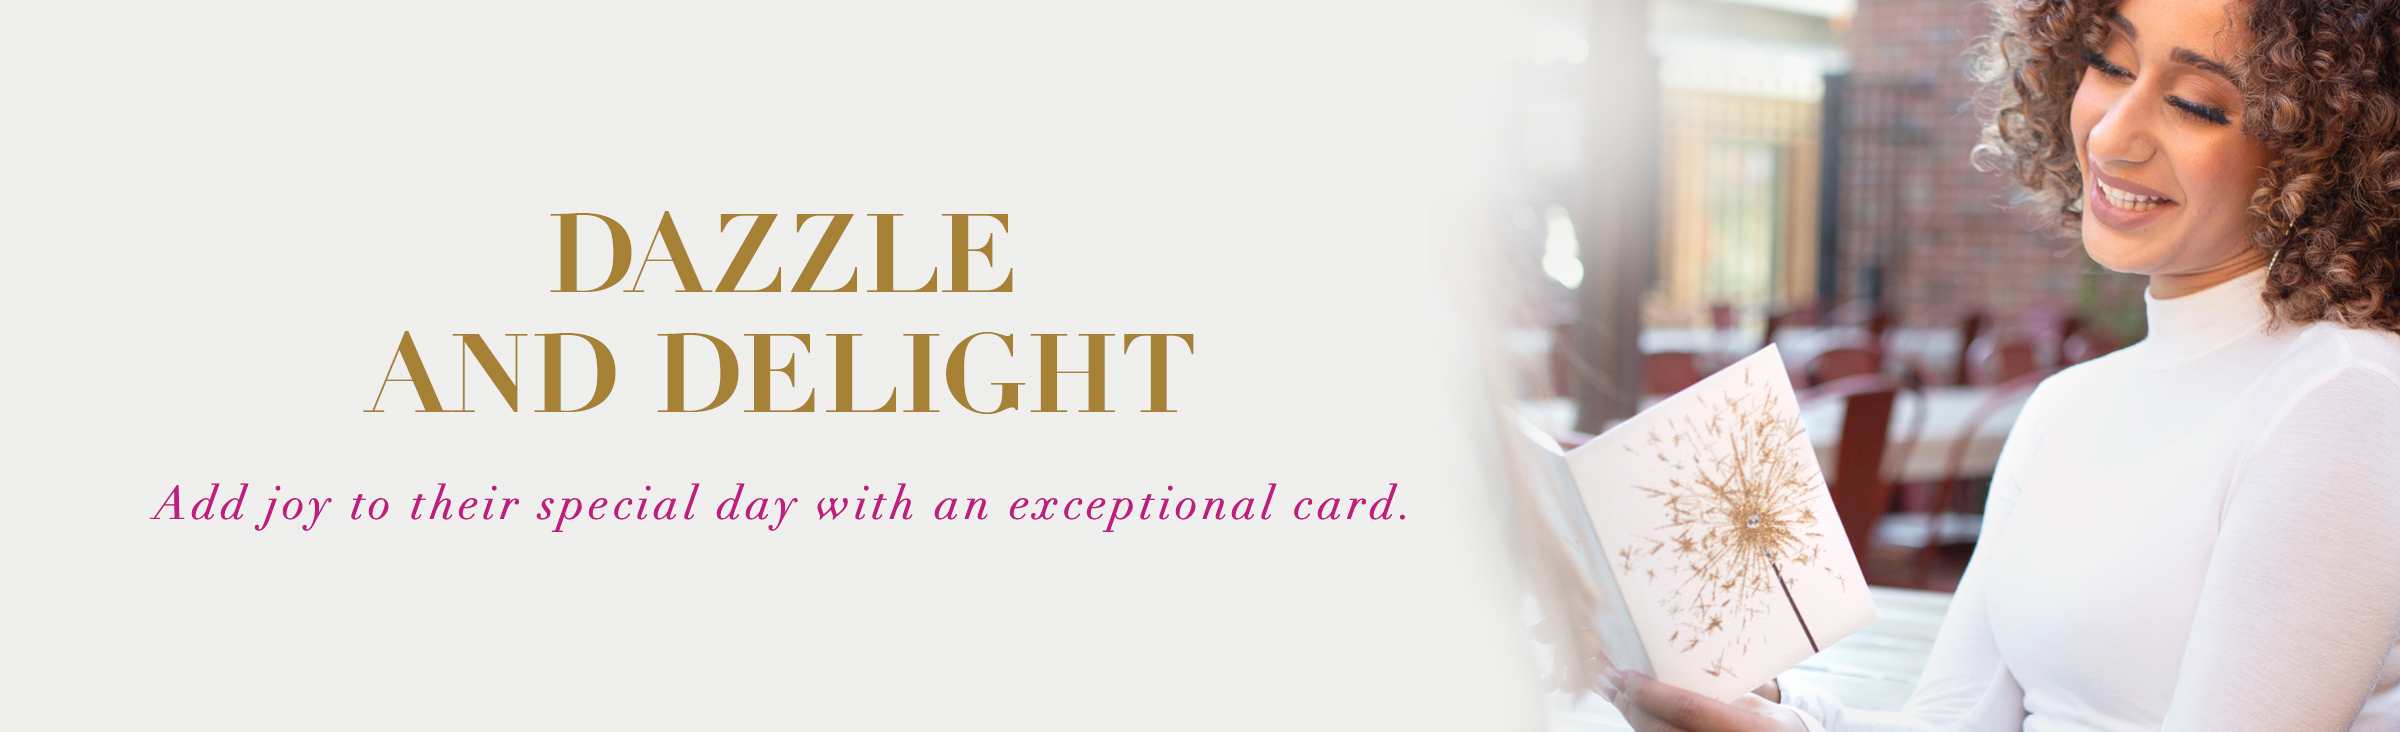 Dazzle and Delight Add joy to their birthday with an exceptional card